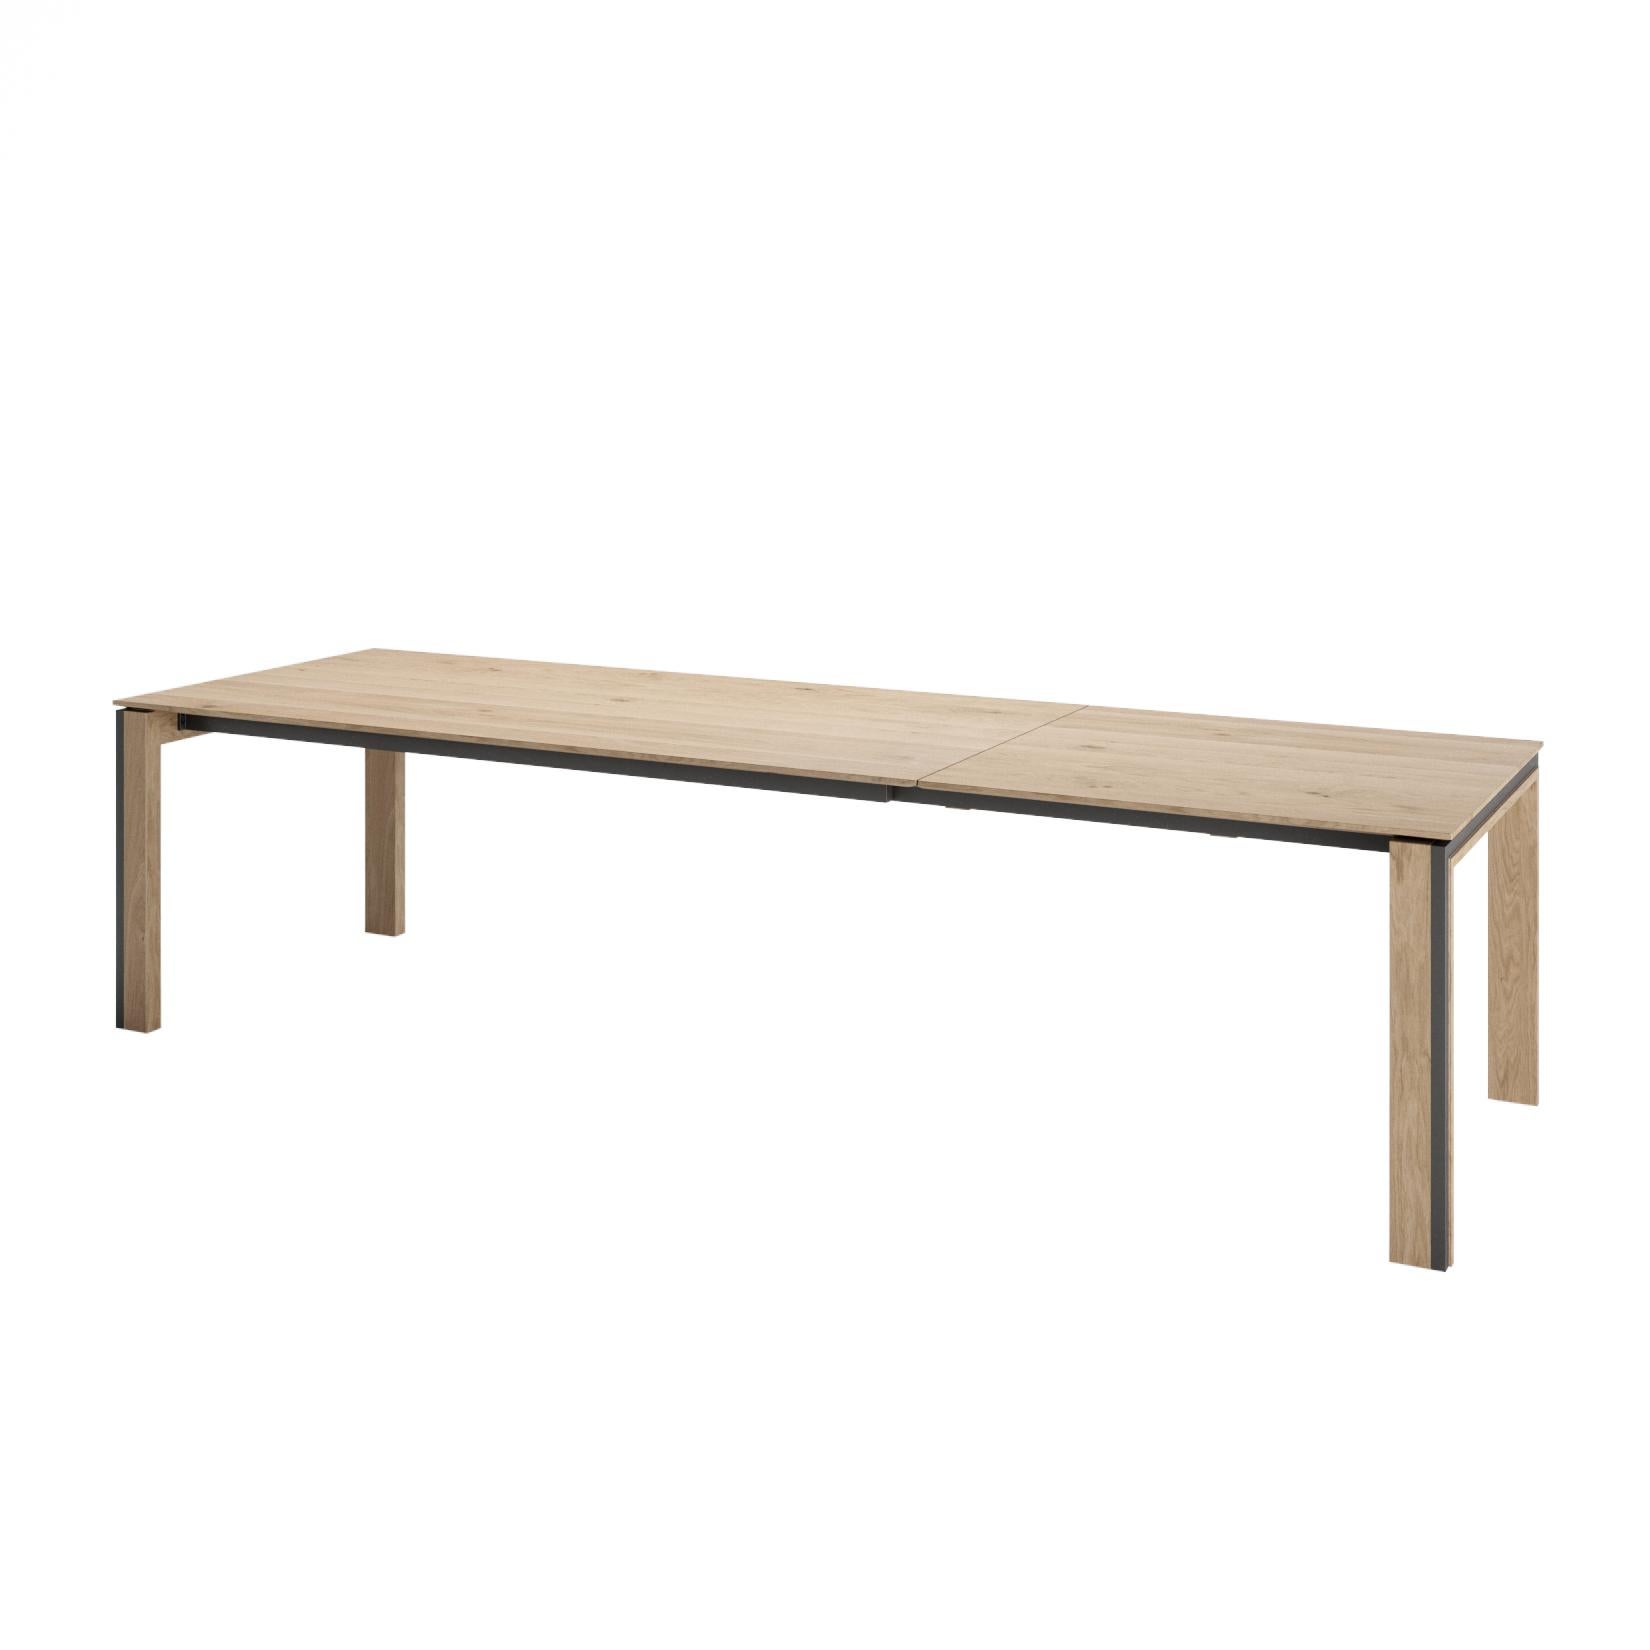 Portuguese Lounge Table Extension For Sale